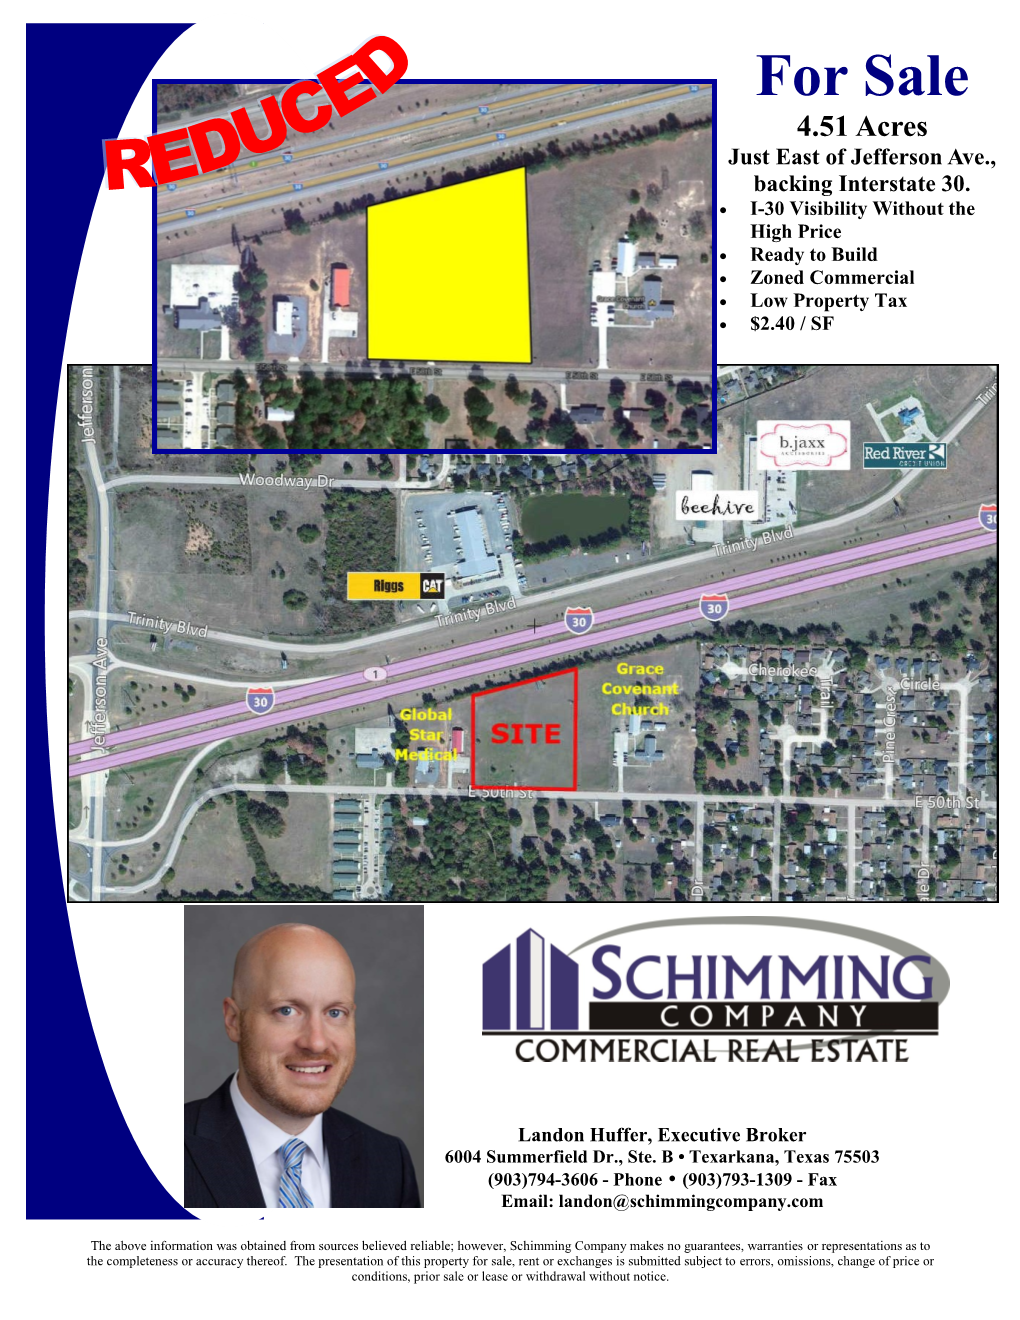 For Sale 4.51 Acres Just East of Jefferson Ave., Backing Interstate 30